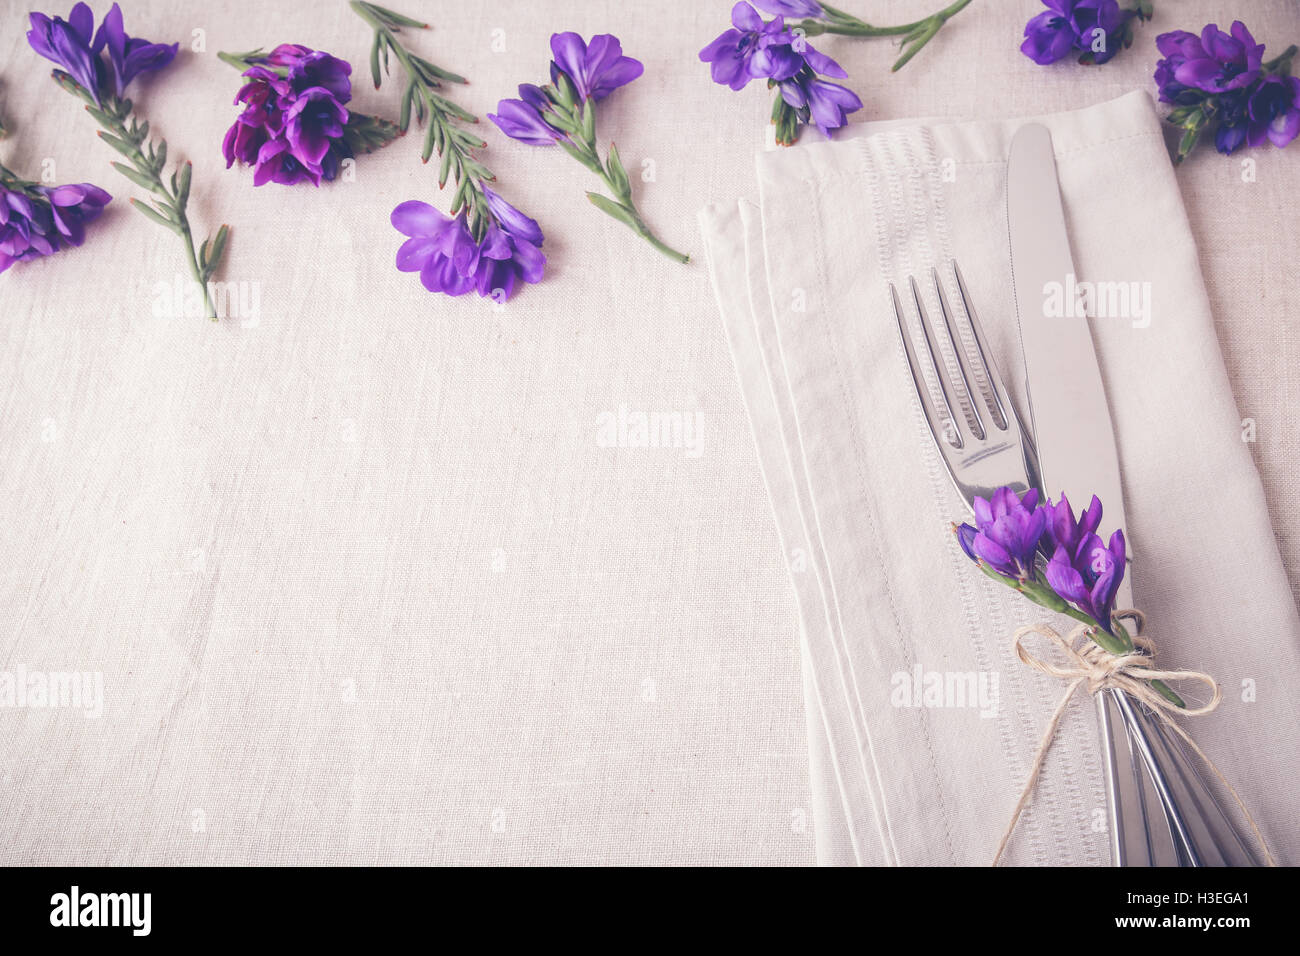 Purple flower table place setting on linen toning copy space background Stock Photo